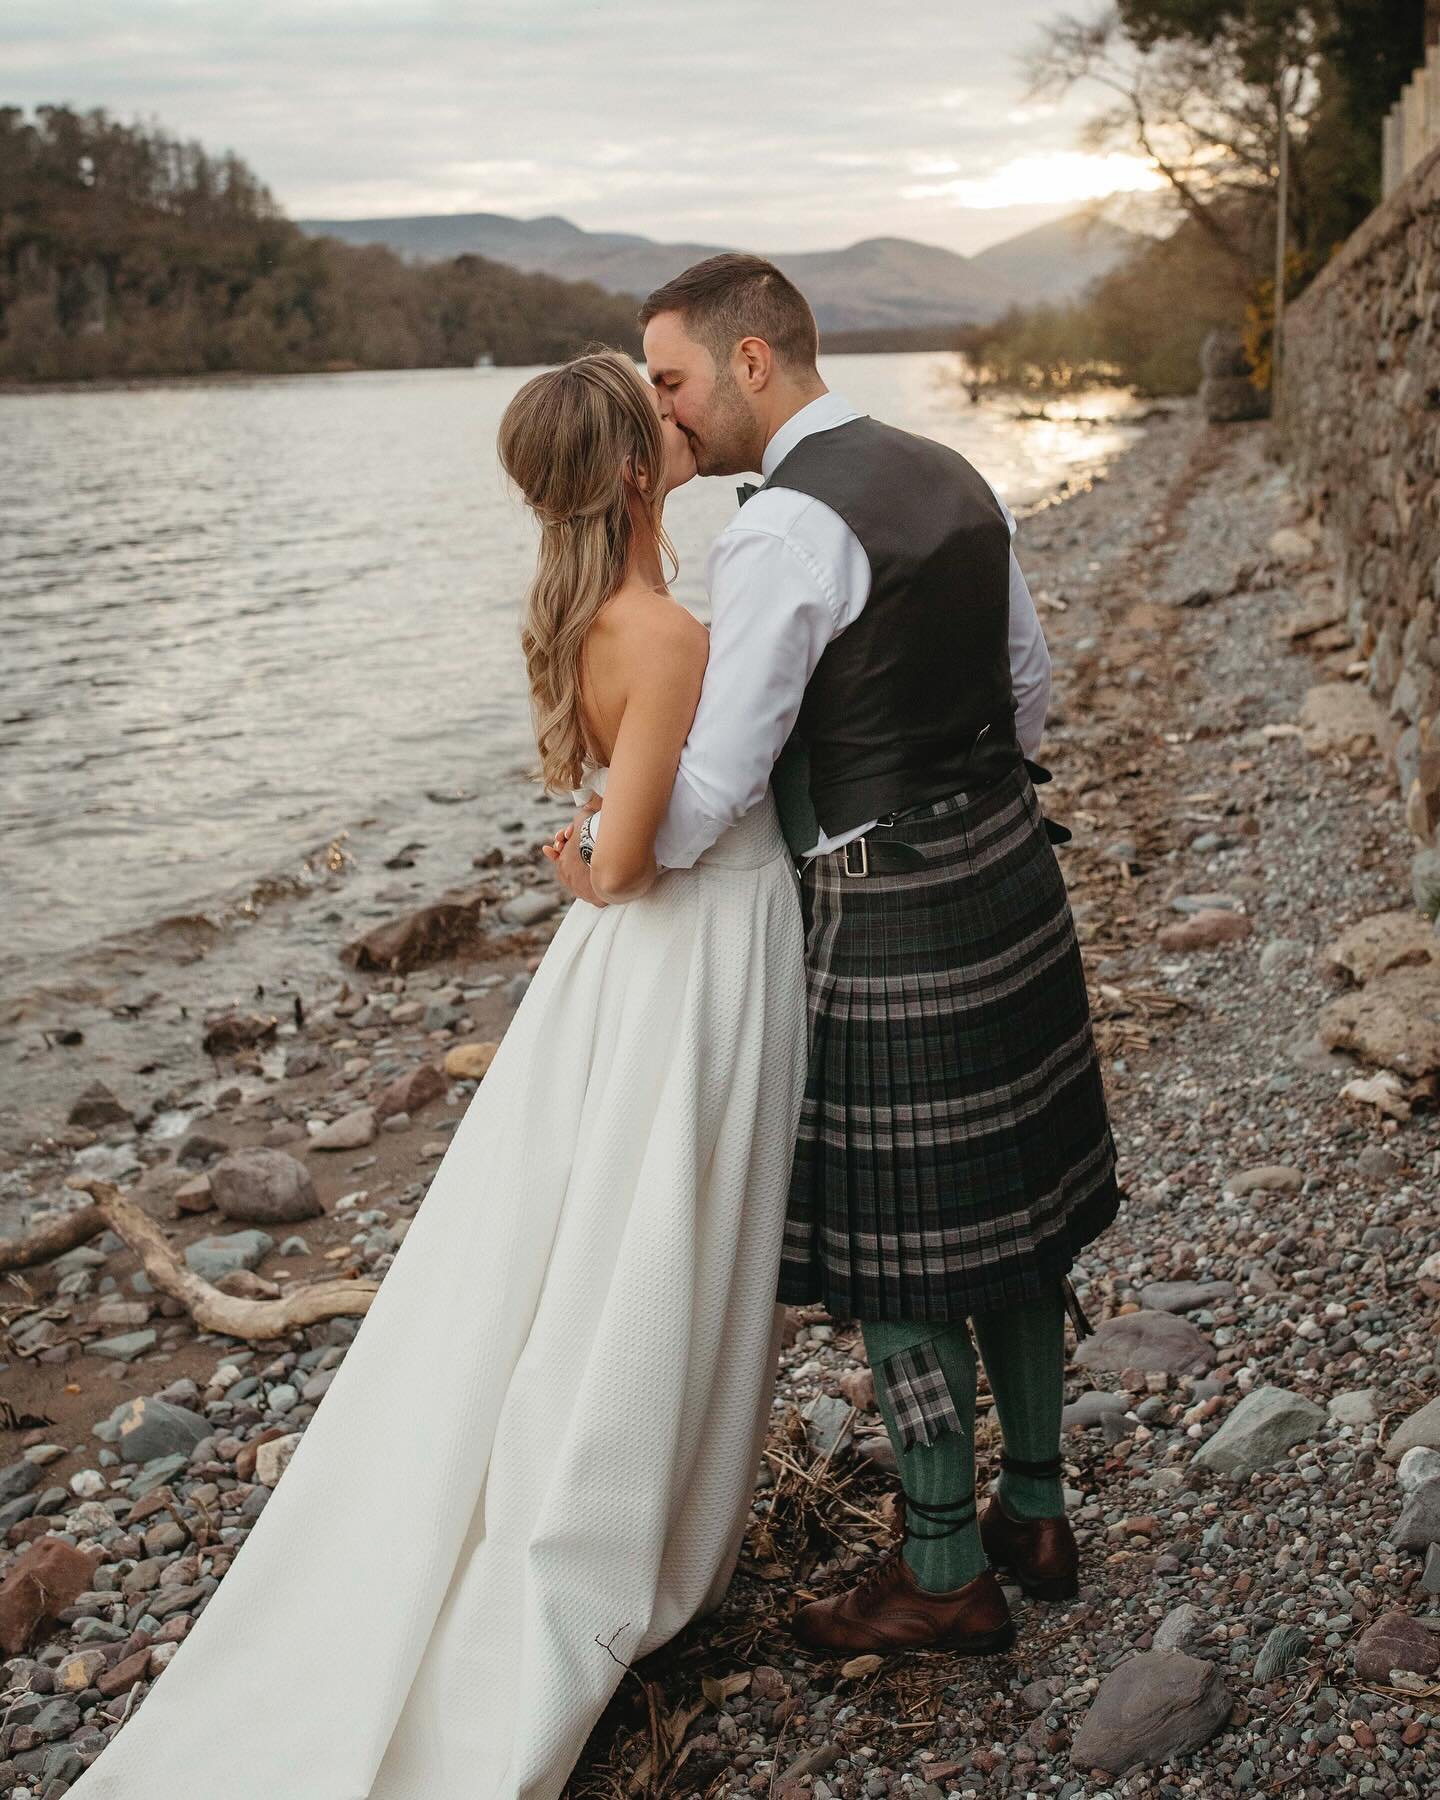 I still can&rsquo;t quite get over how incredible Holly &amp; Daniel&rsquo;s wedding extravaganza on the banks of Loch Lomond was on Saturday. The sun shone, the champagne flowed and everyone (me included!) had an absolute ball! It&rsquo;s hard to pu